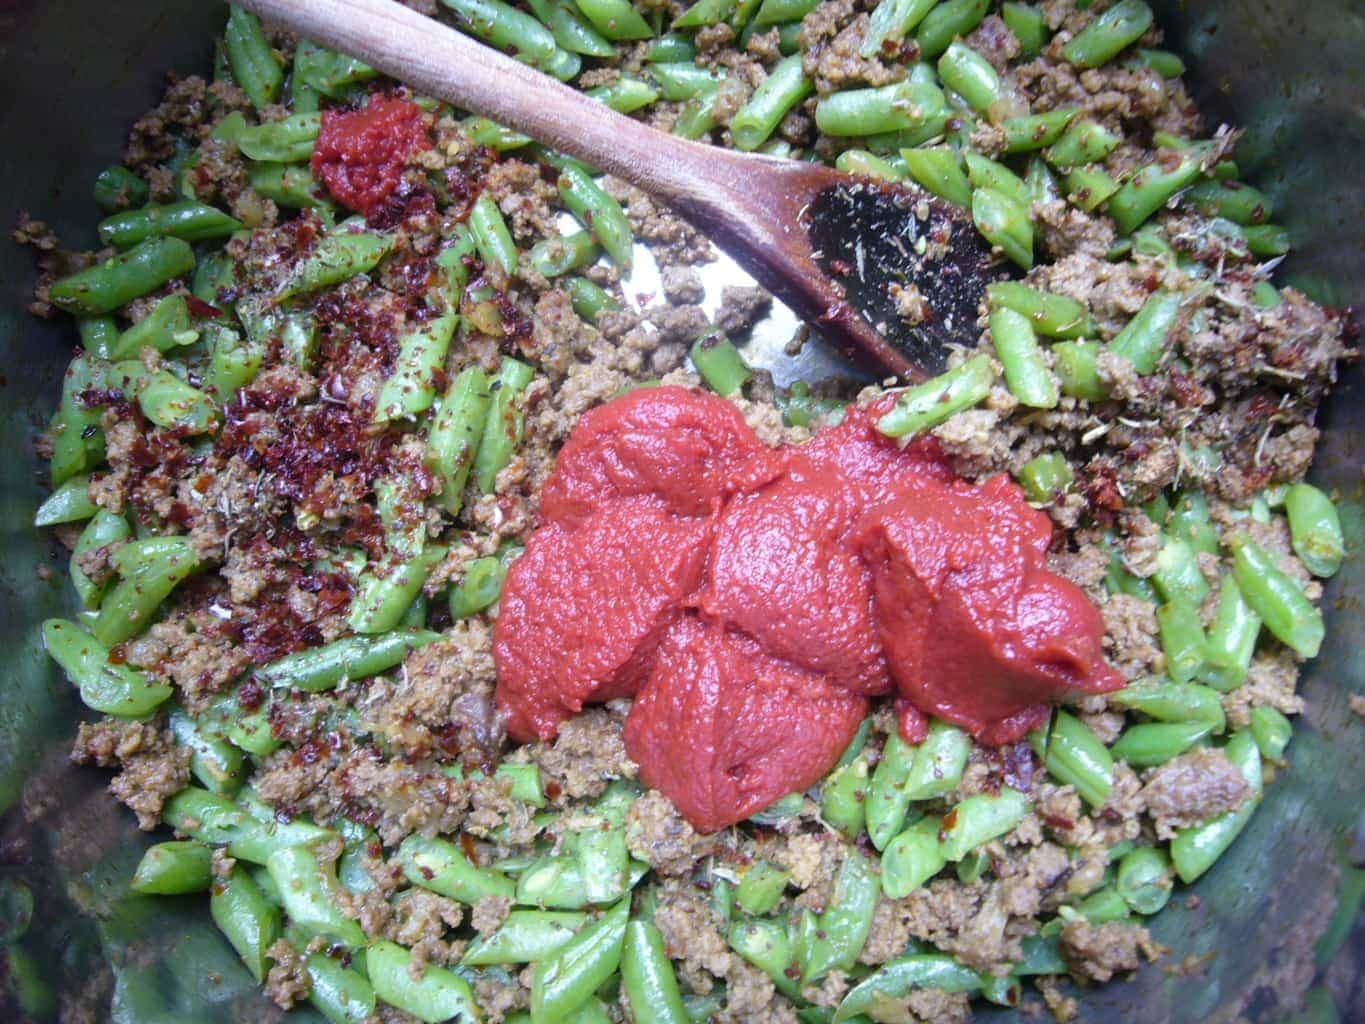 Tomato paste is added to green beans and meat to make Persian rice.